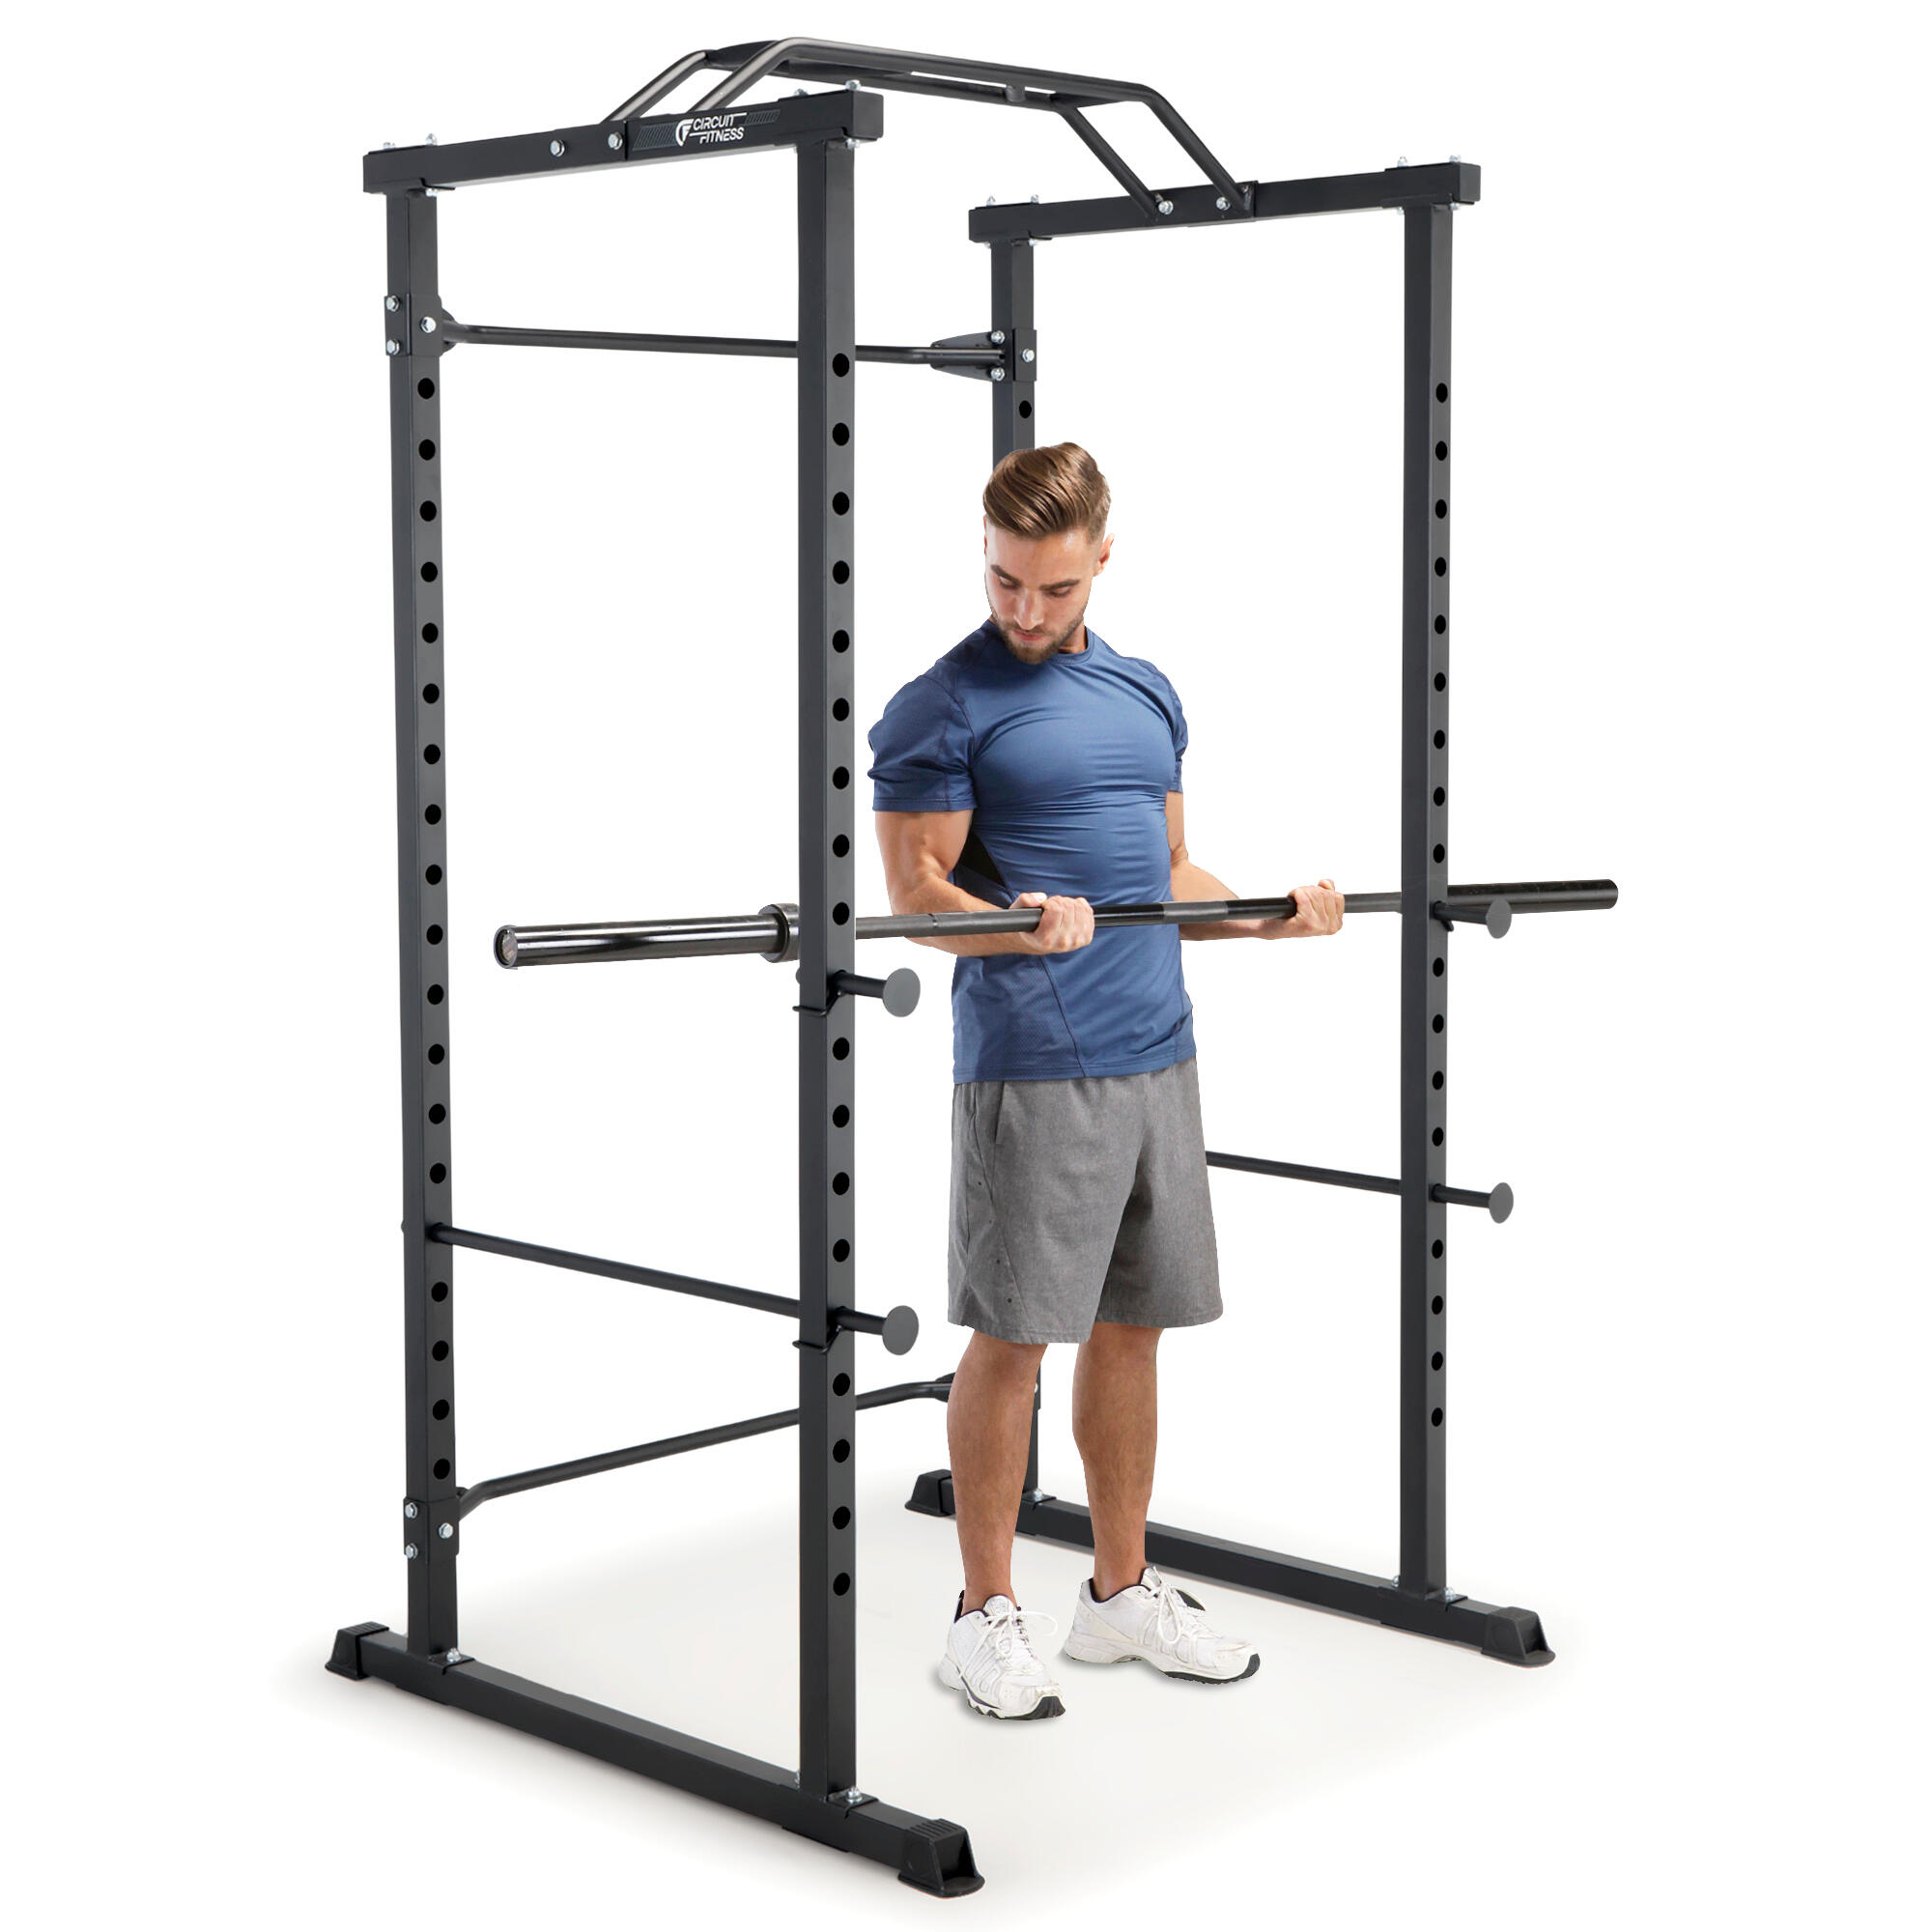 CIRCUIT FITNESS 600CG MULTI FUNCTION FITNESS CAGE 5/7